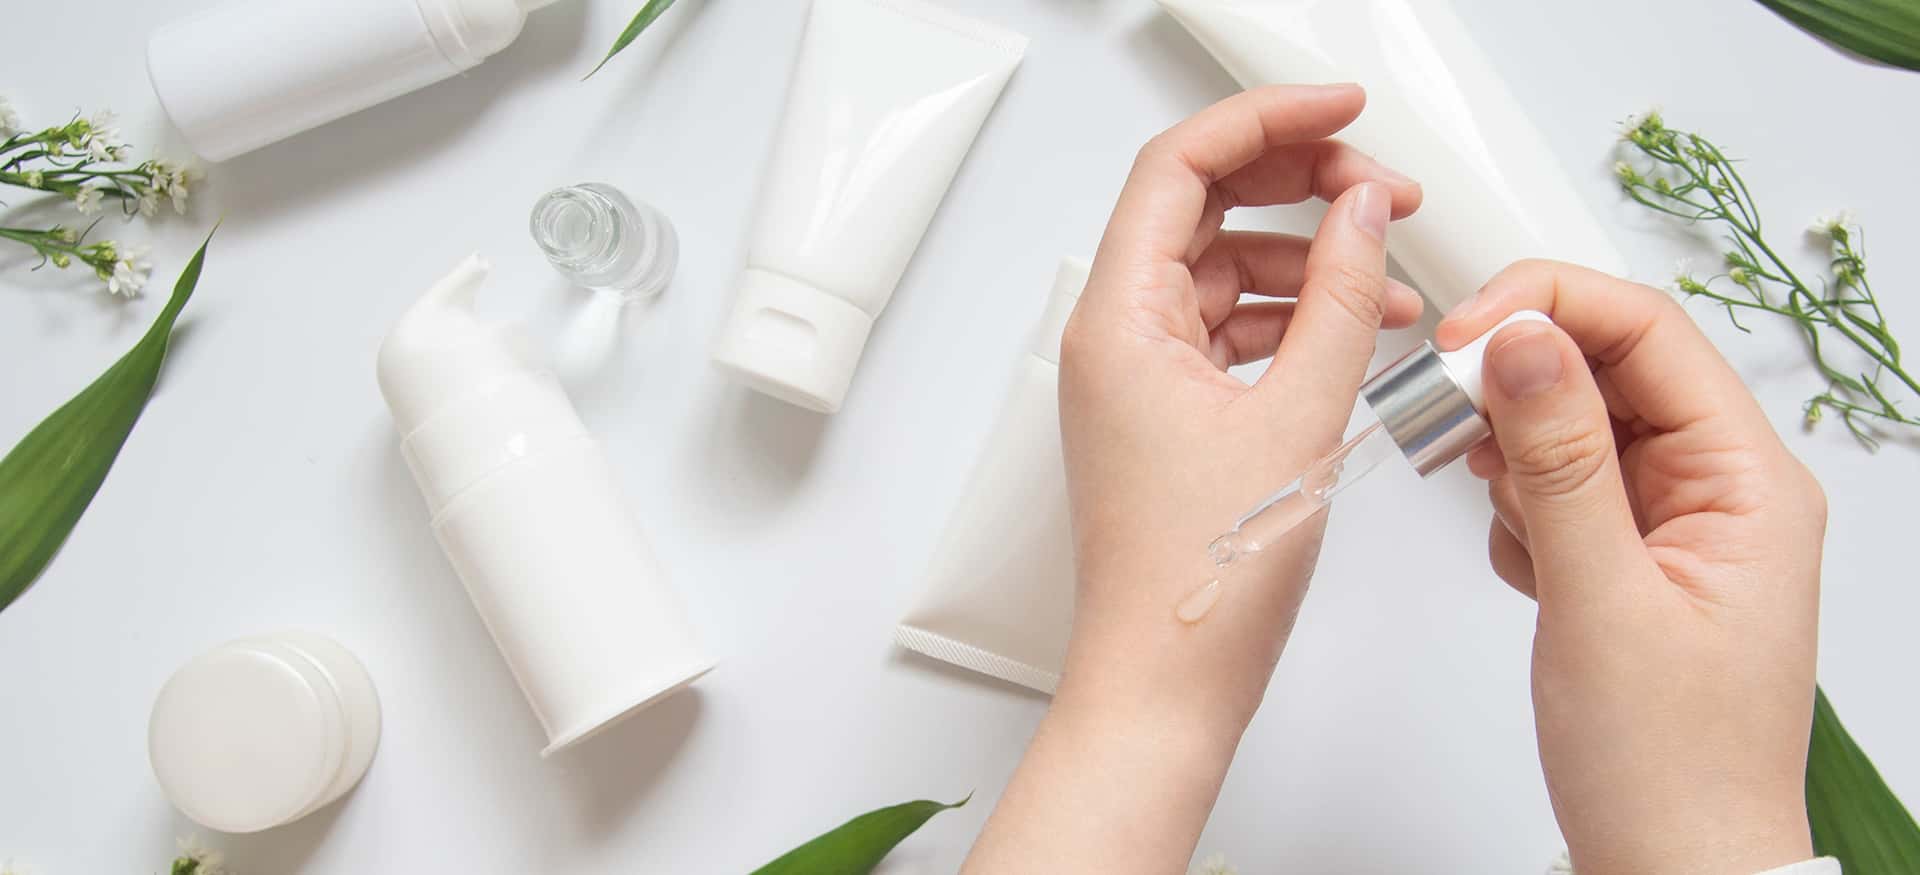 Here's Why You Should Indulge in Paraben Free Skincare